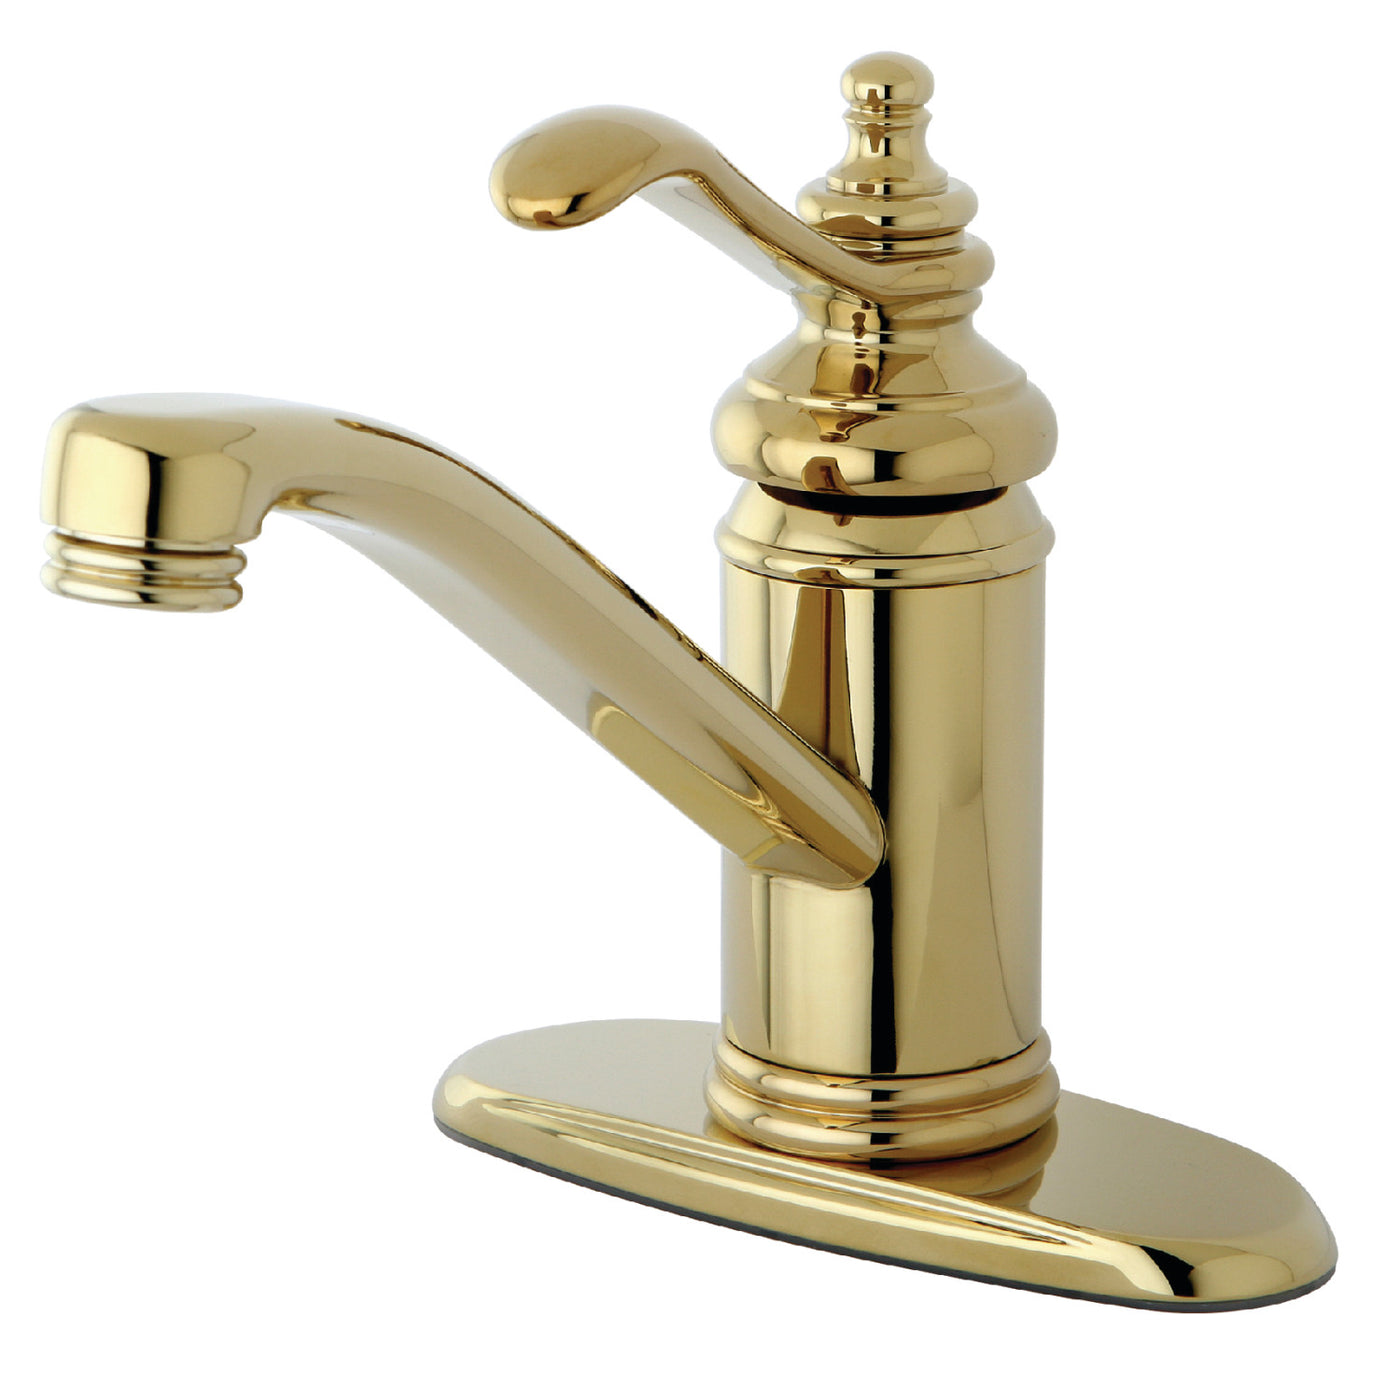 Elements of Design ES3402TL Single-Handle Bathroom Faucet with Push Pop-Up, Polished Brass